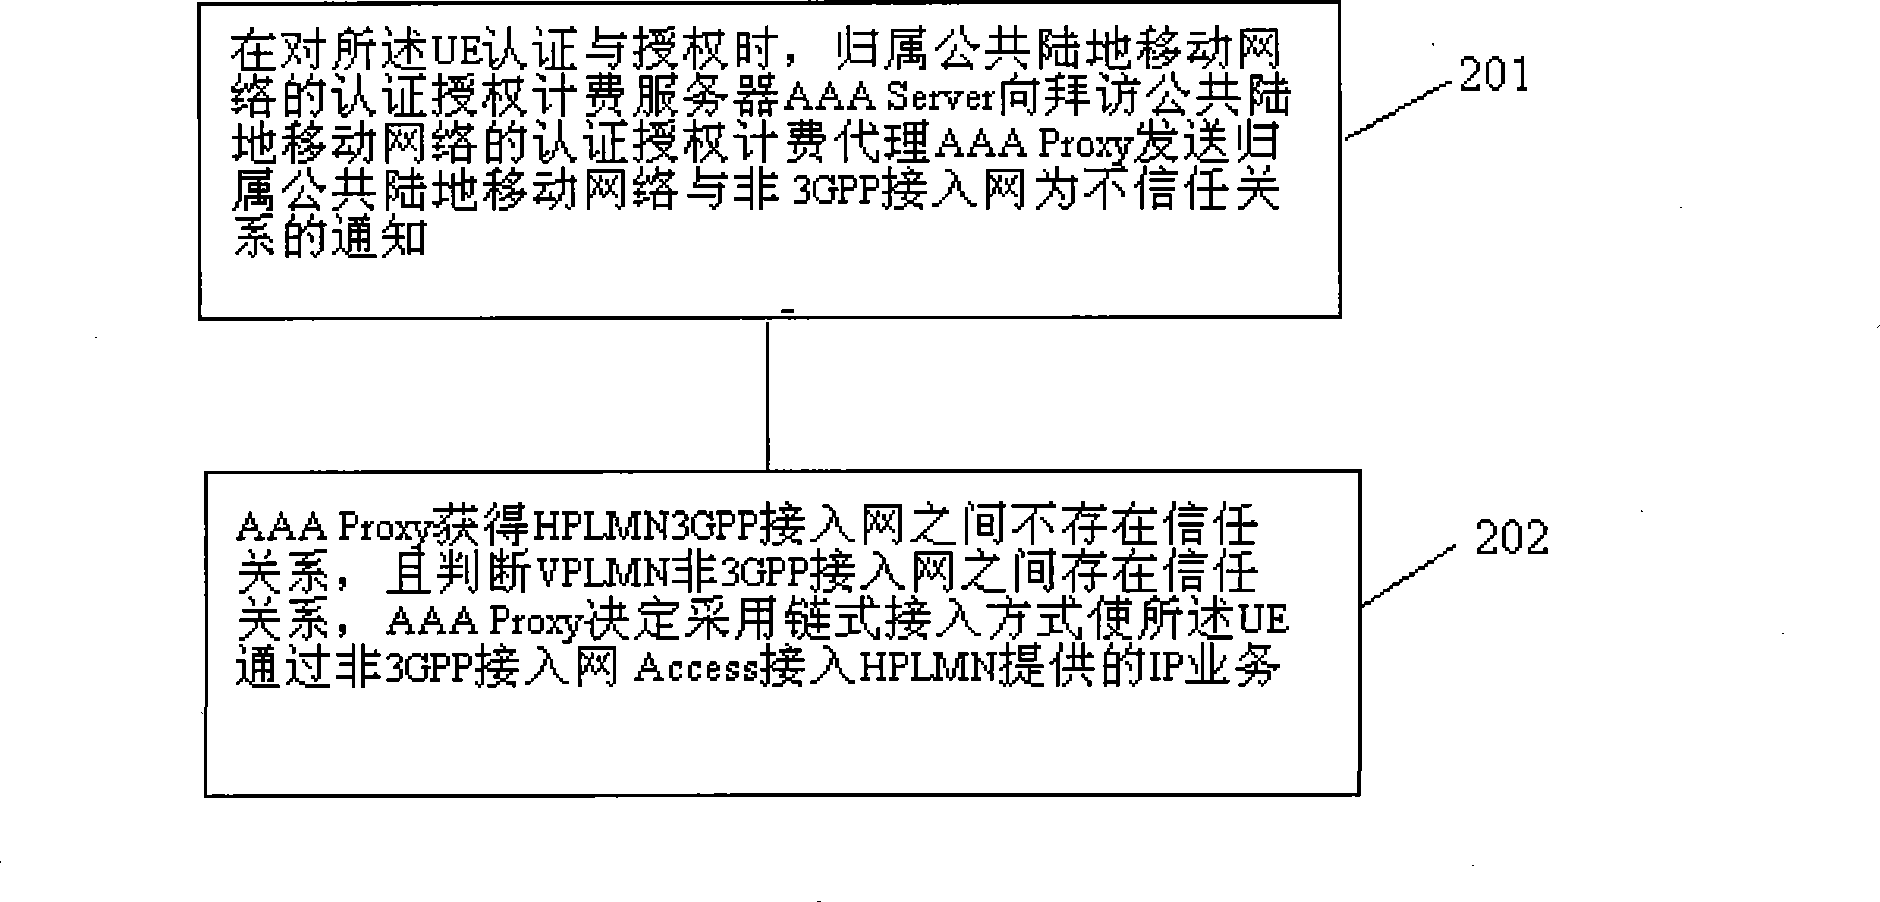 Method for implementing access network